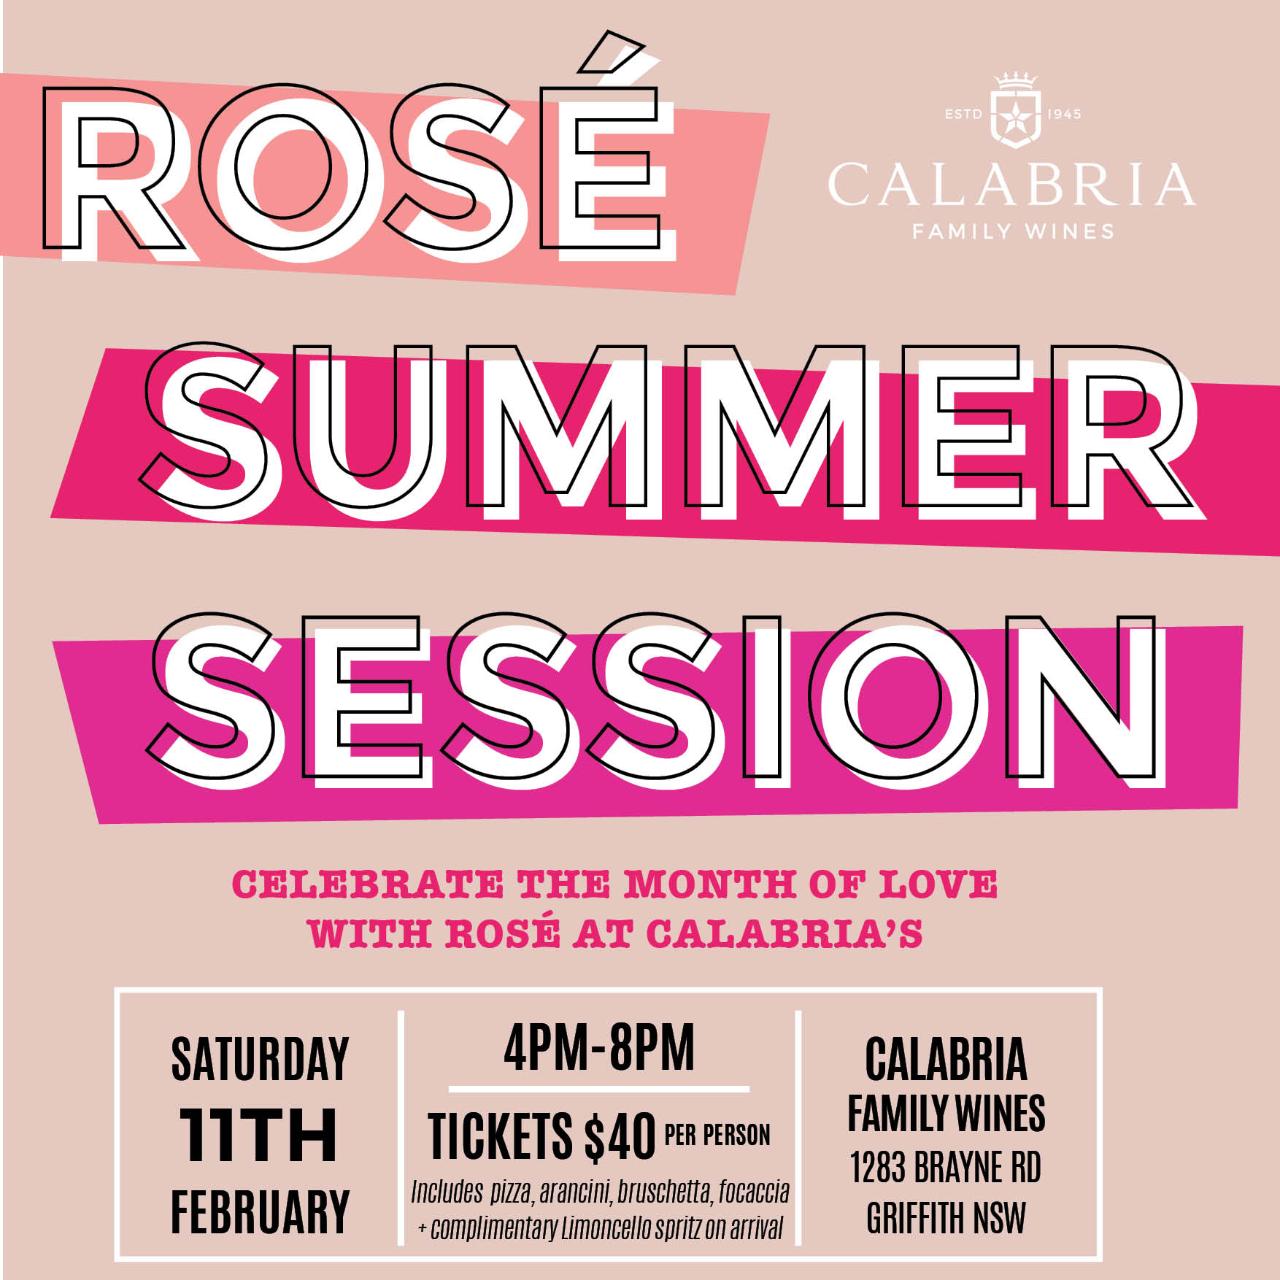 Rose' summer party at Calabria Family Wines | Saturday 11th February 4pm-8pm